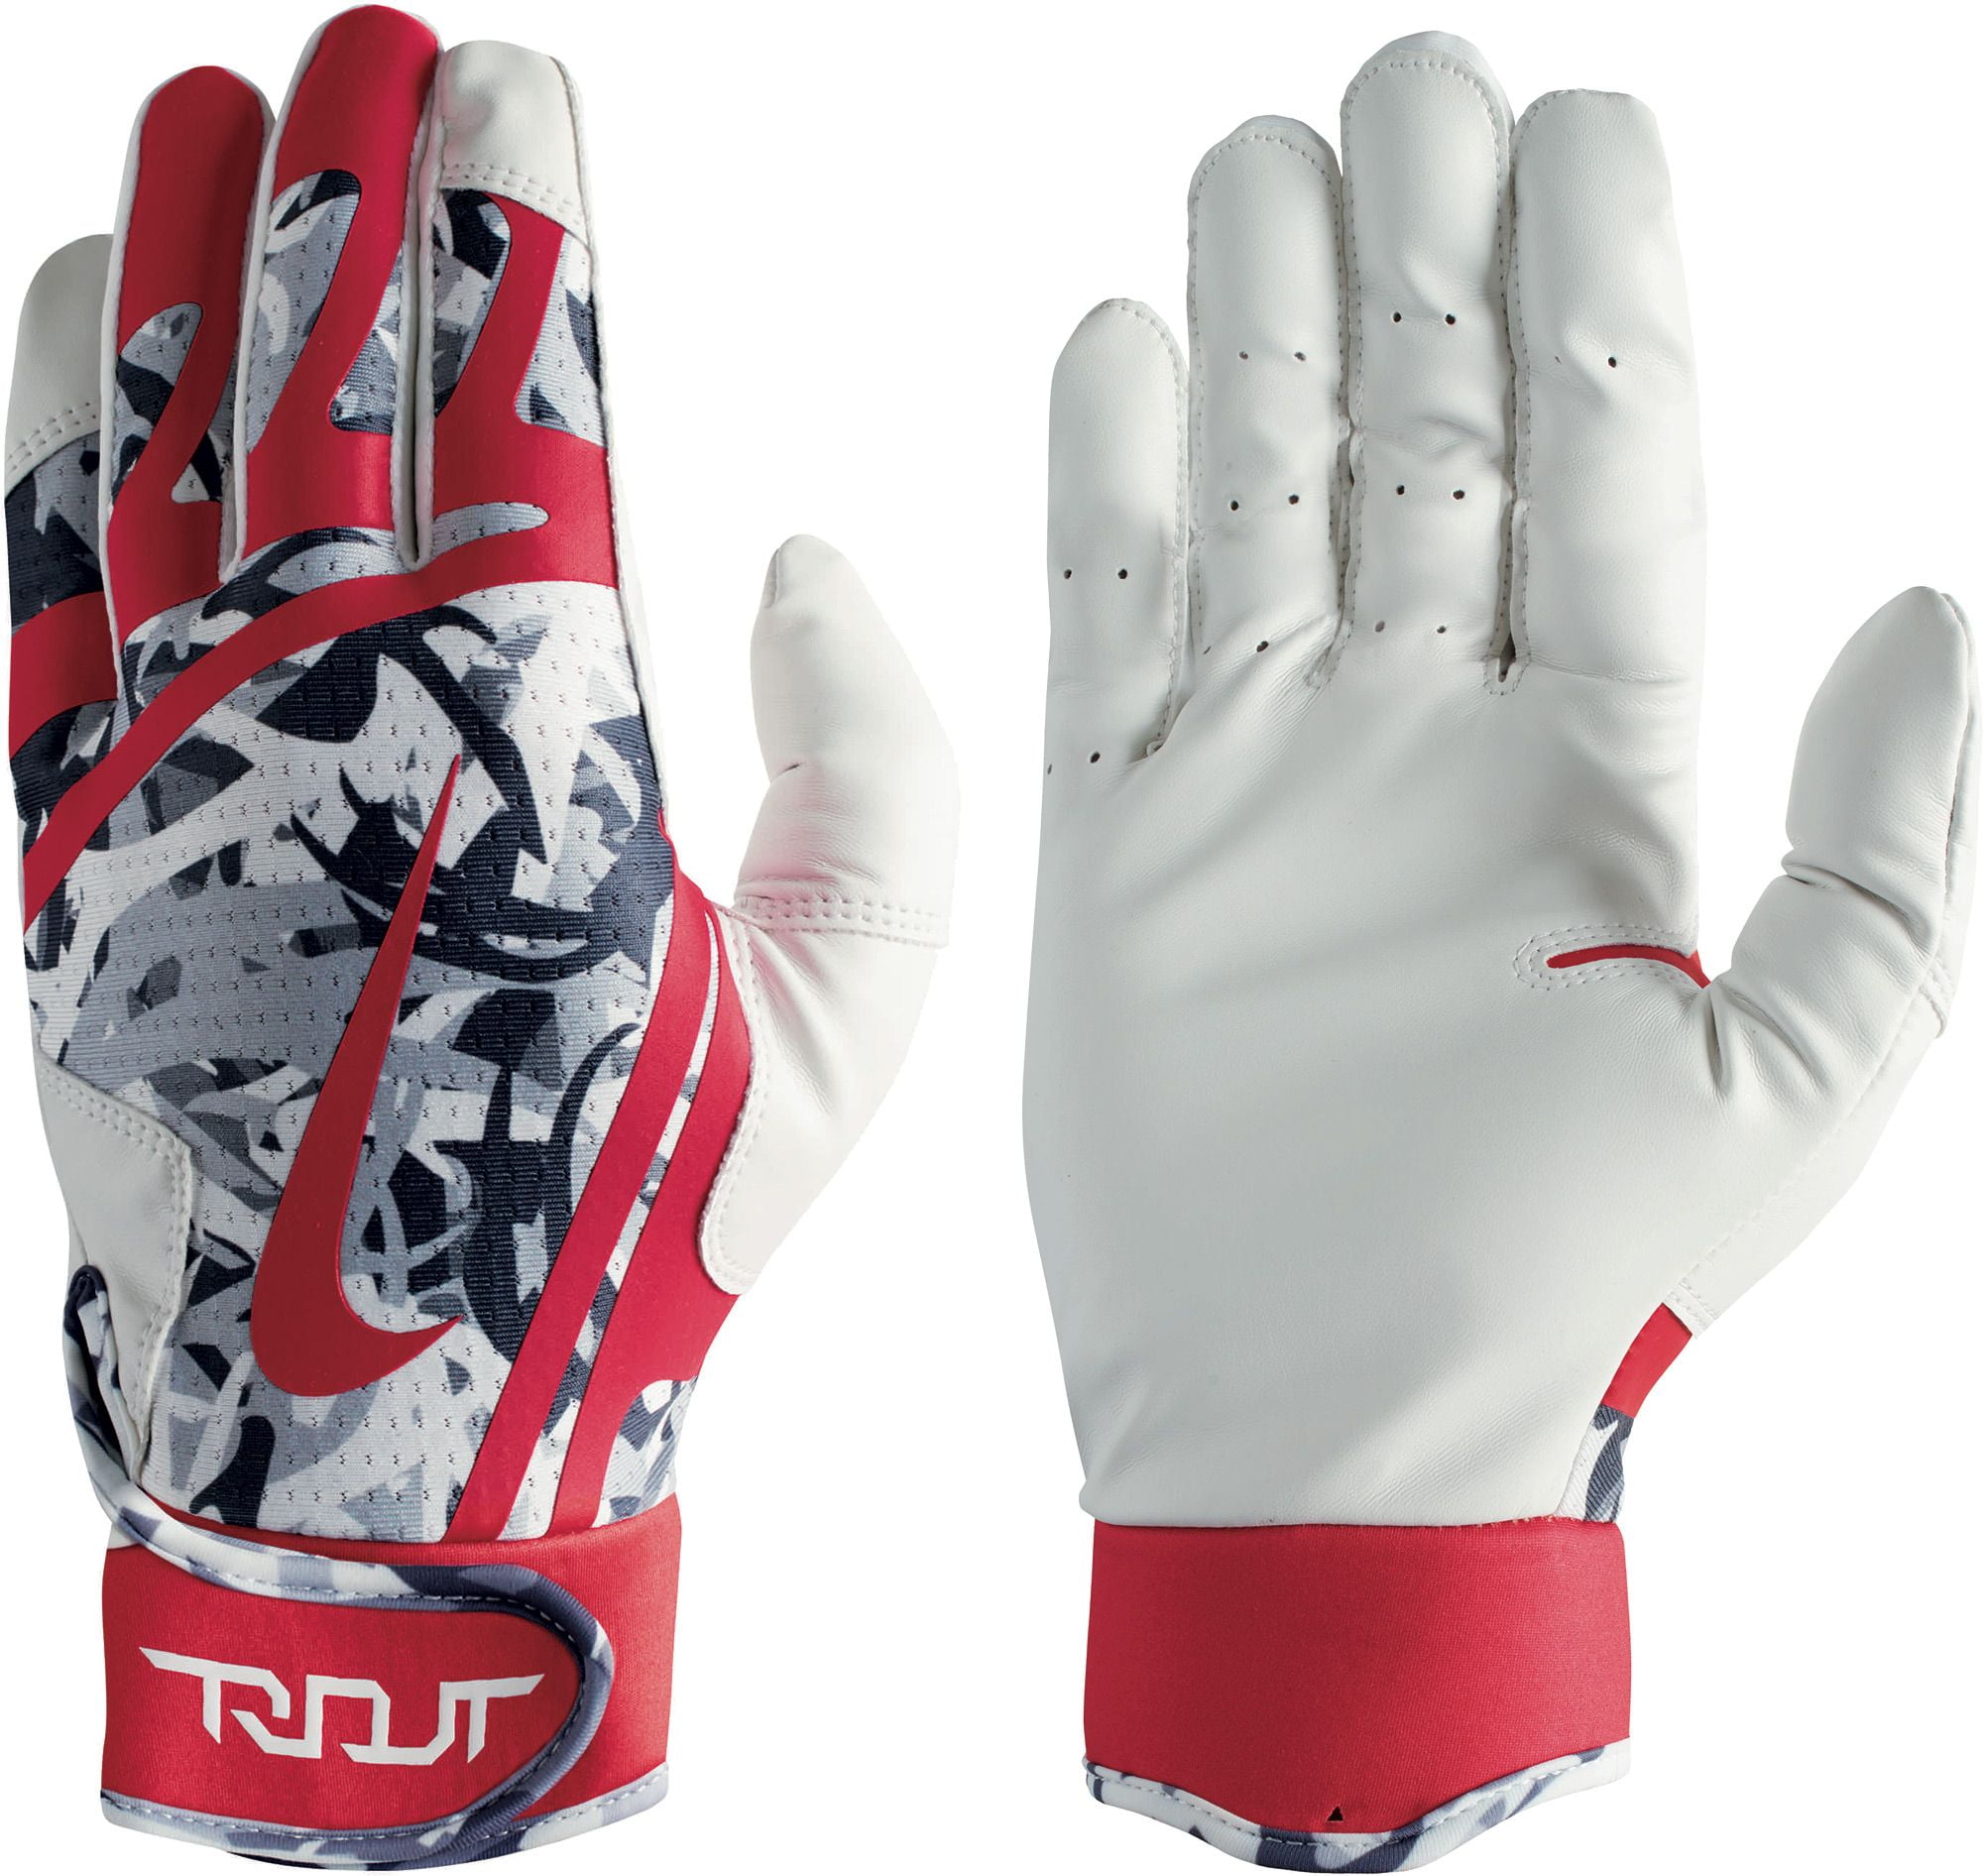 mike trout batting gloves